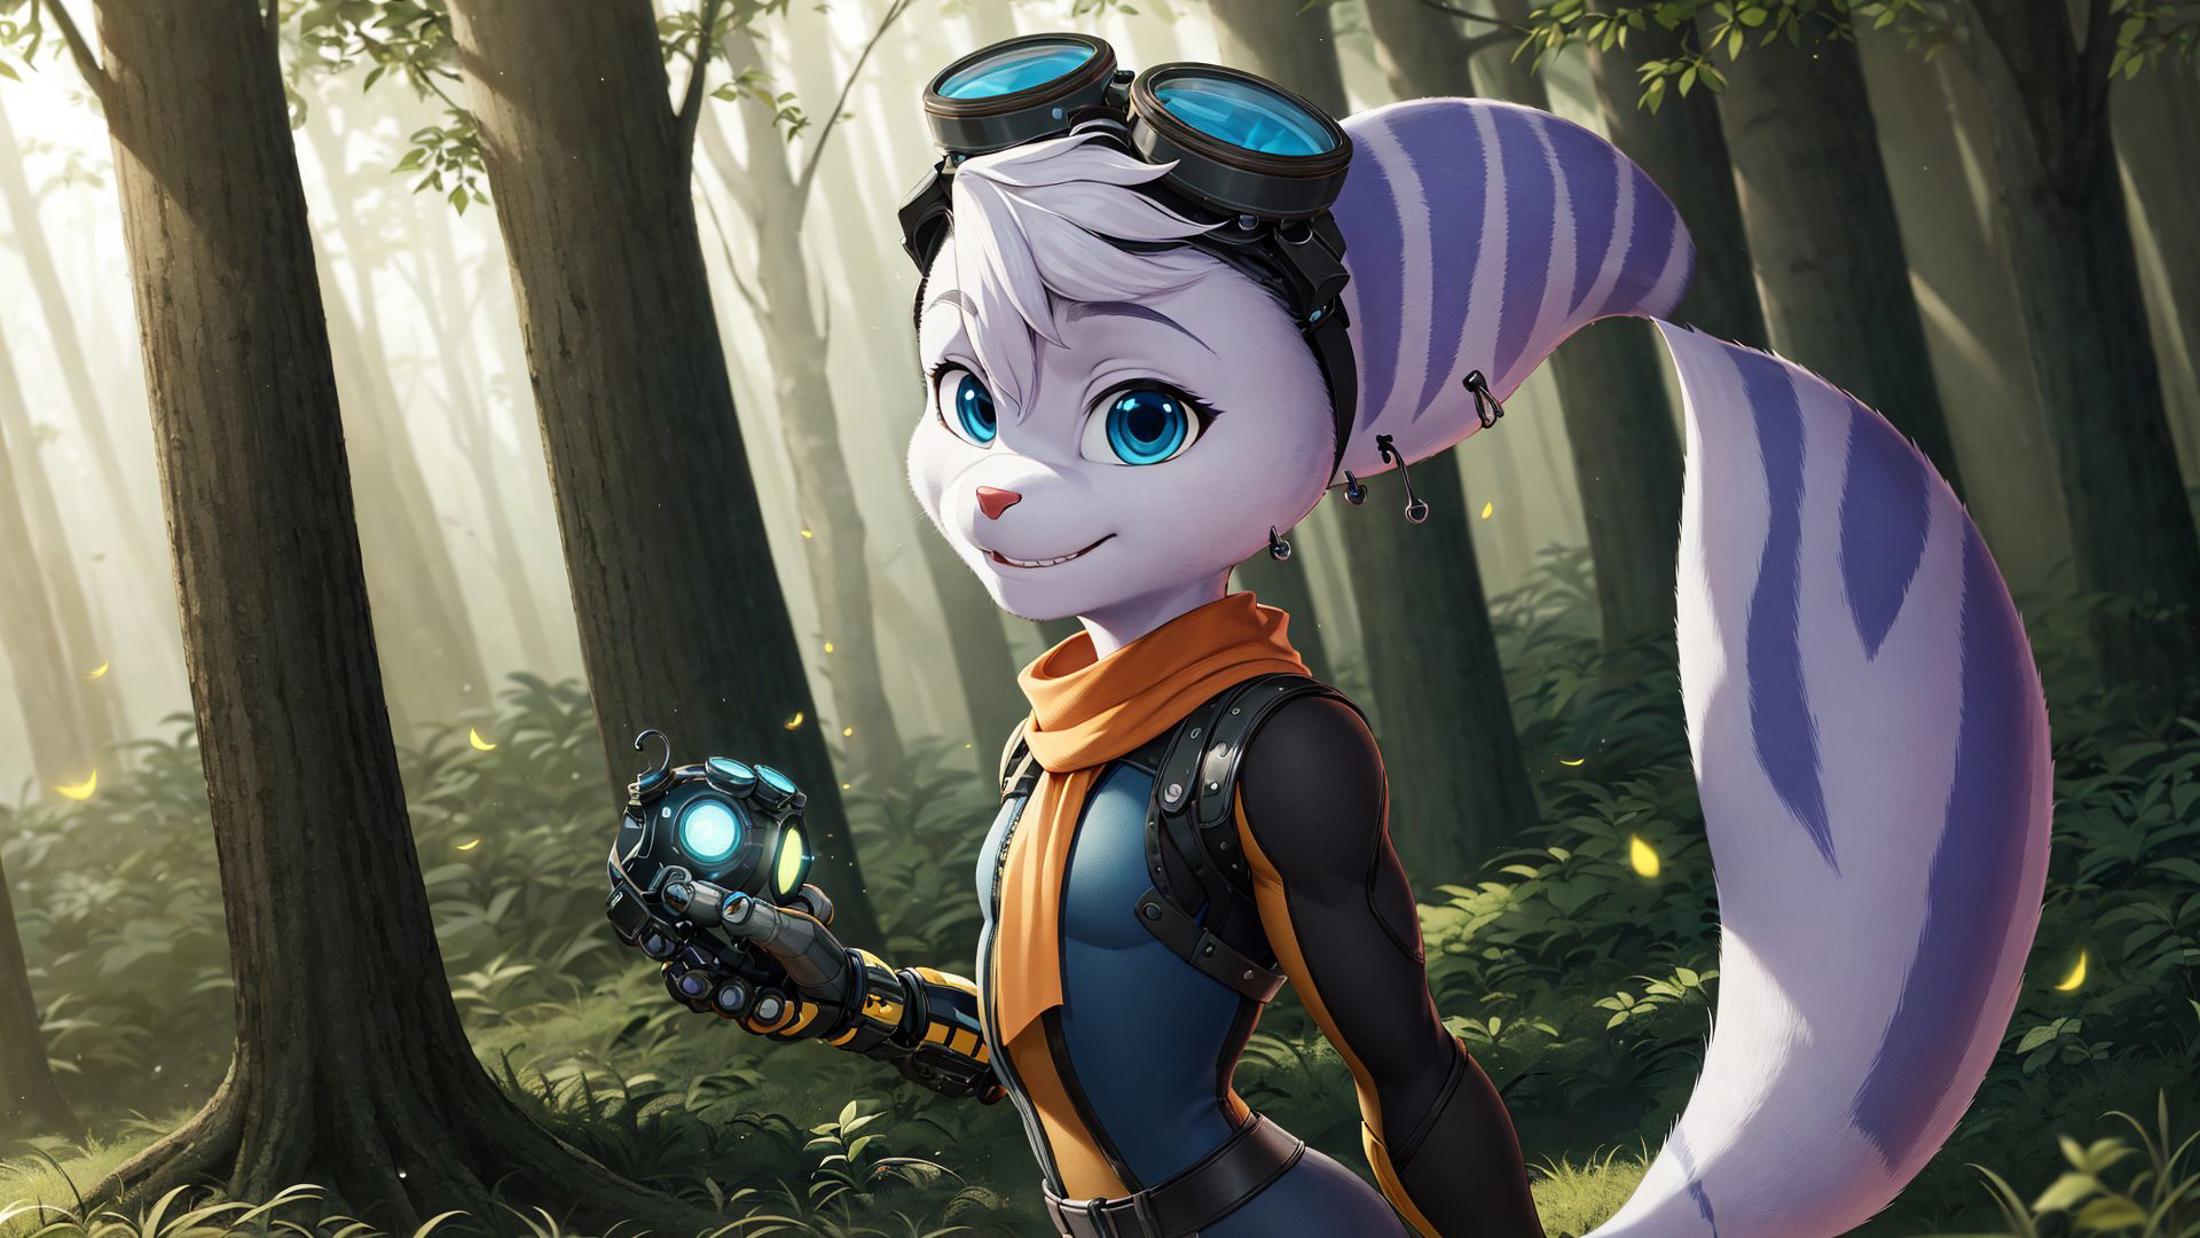 Rivet (Ratchet and Clank) image by marusame